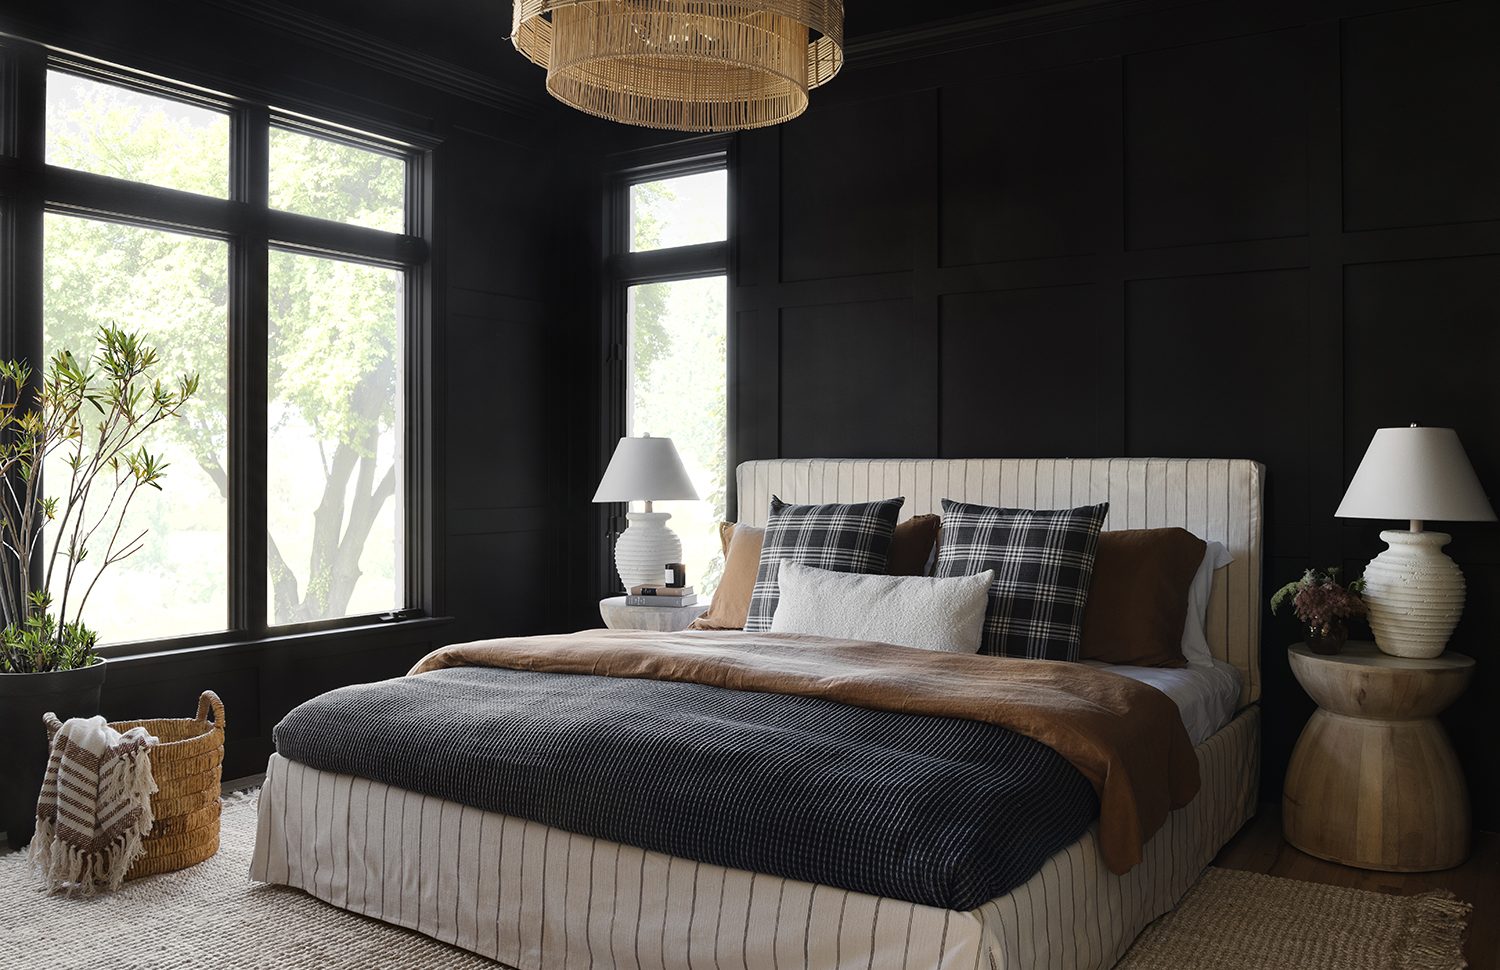 Popular paint colors for bedrooms